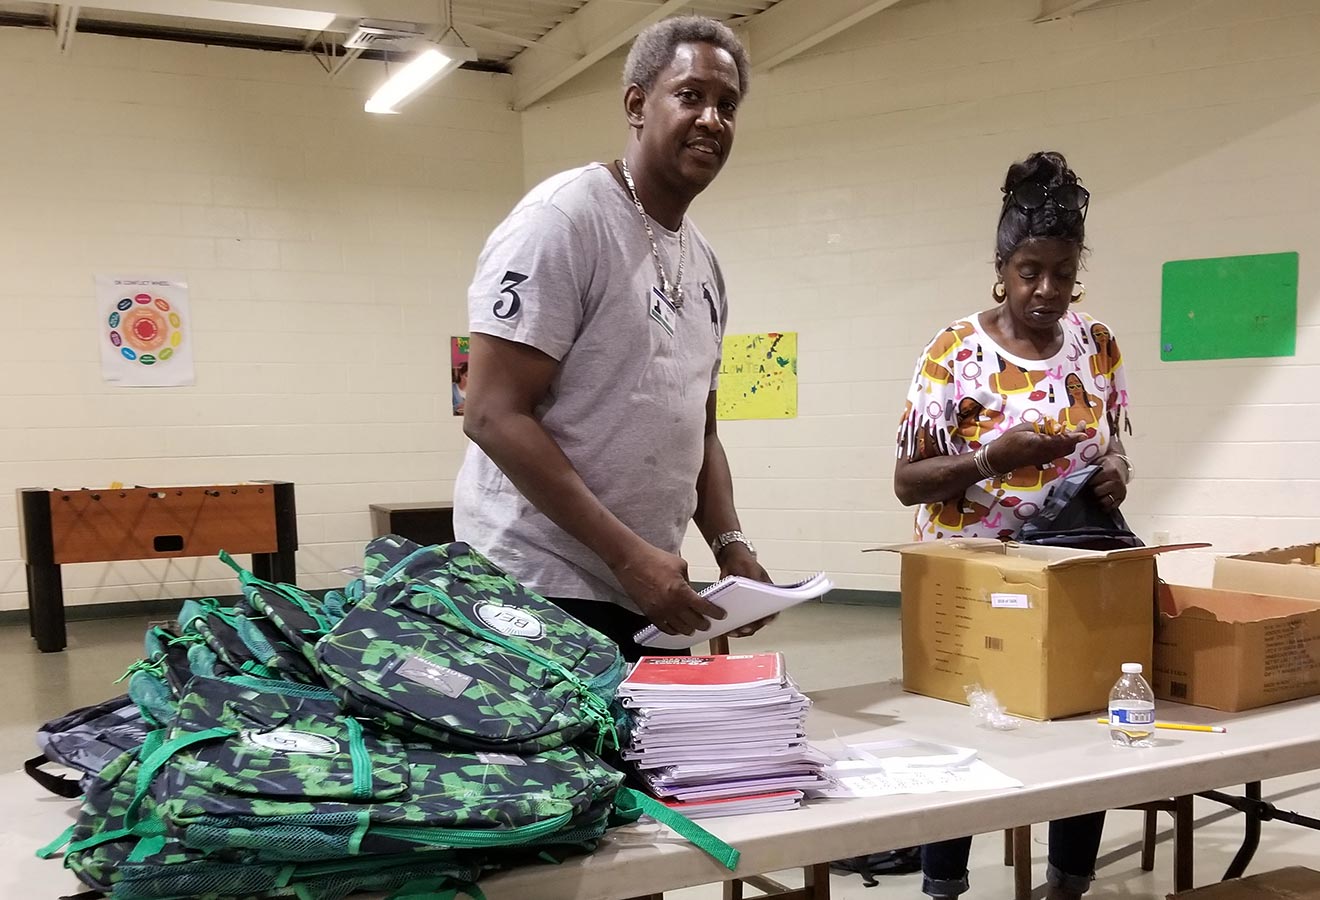 NJ Alumni Services Director Arthur Townes, reentry alumni Dorothy B., and Talbot Hall Administrative Assistant Maalika Taylor at the Backpacking and Potluck Dinner event hosted by PEP.